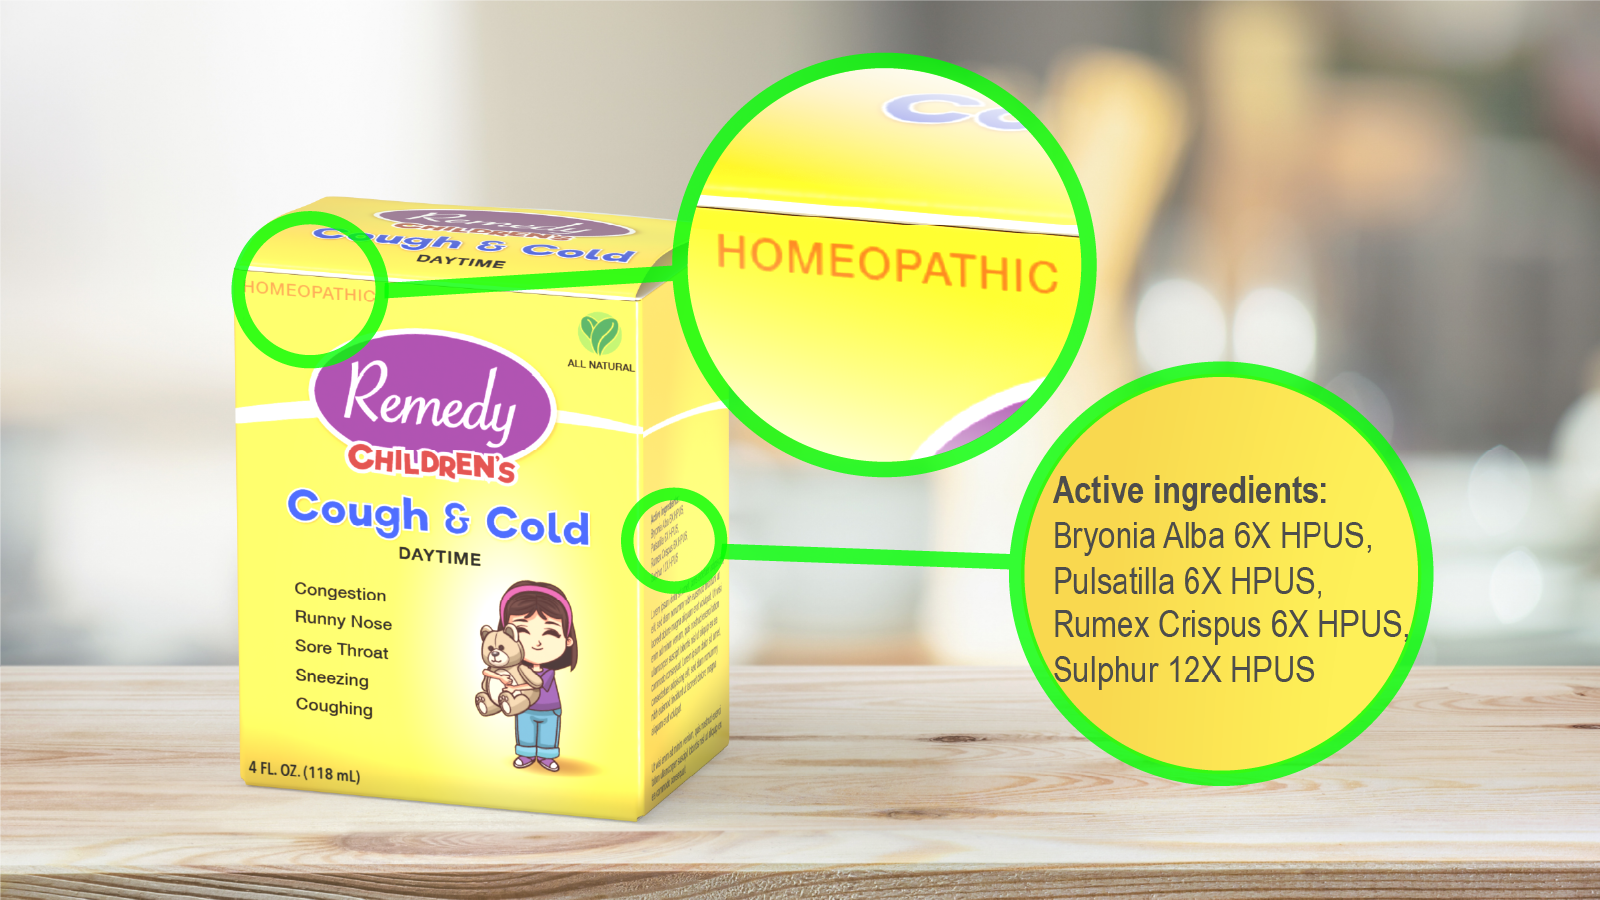 CDER Homeopathic cough and cold remedy